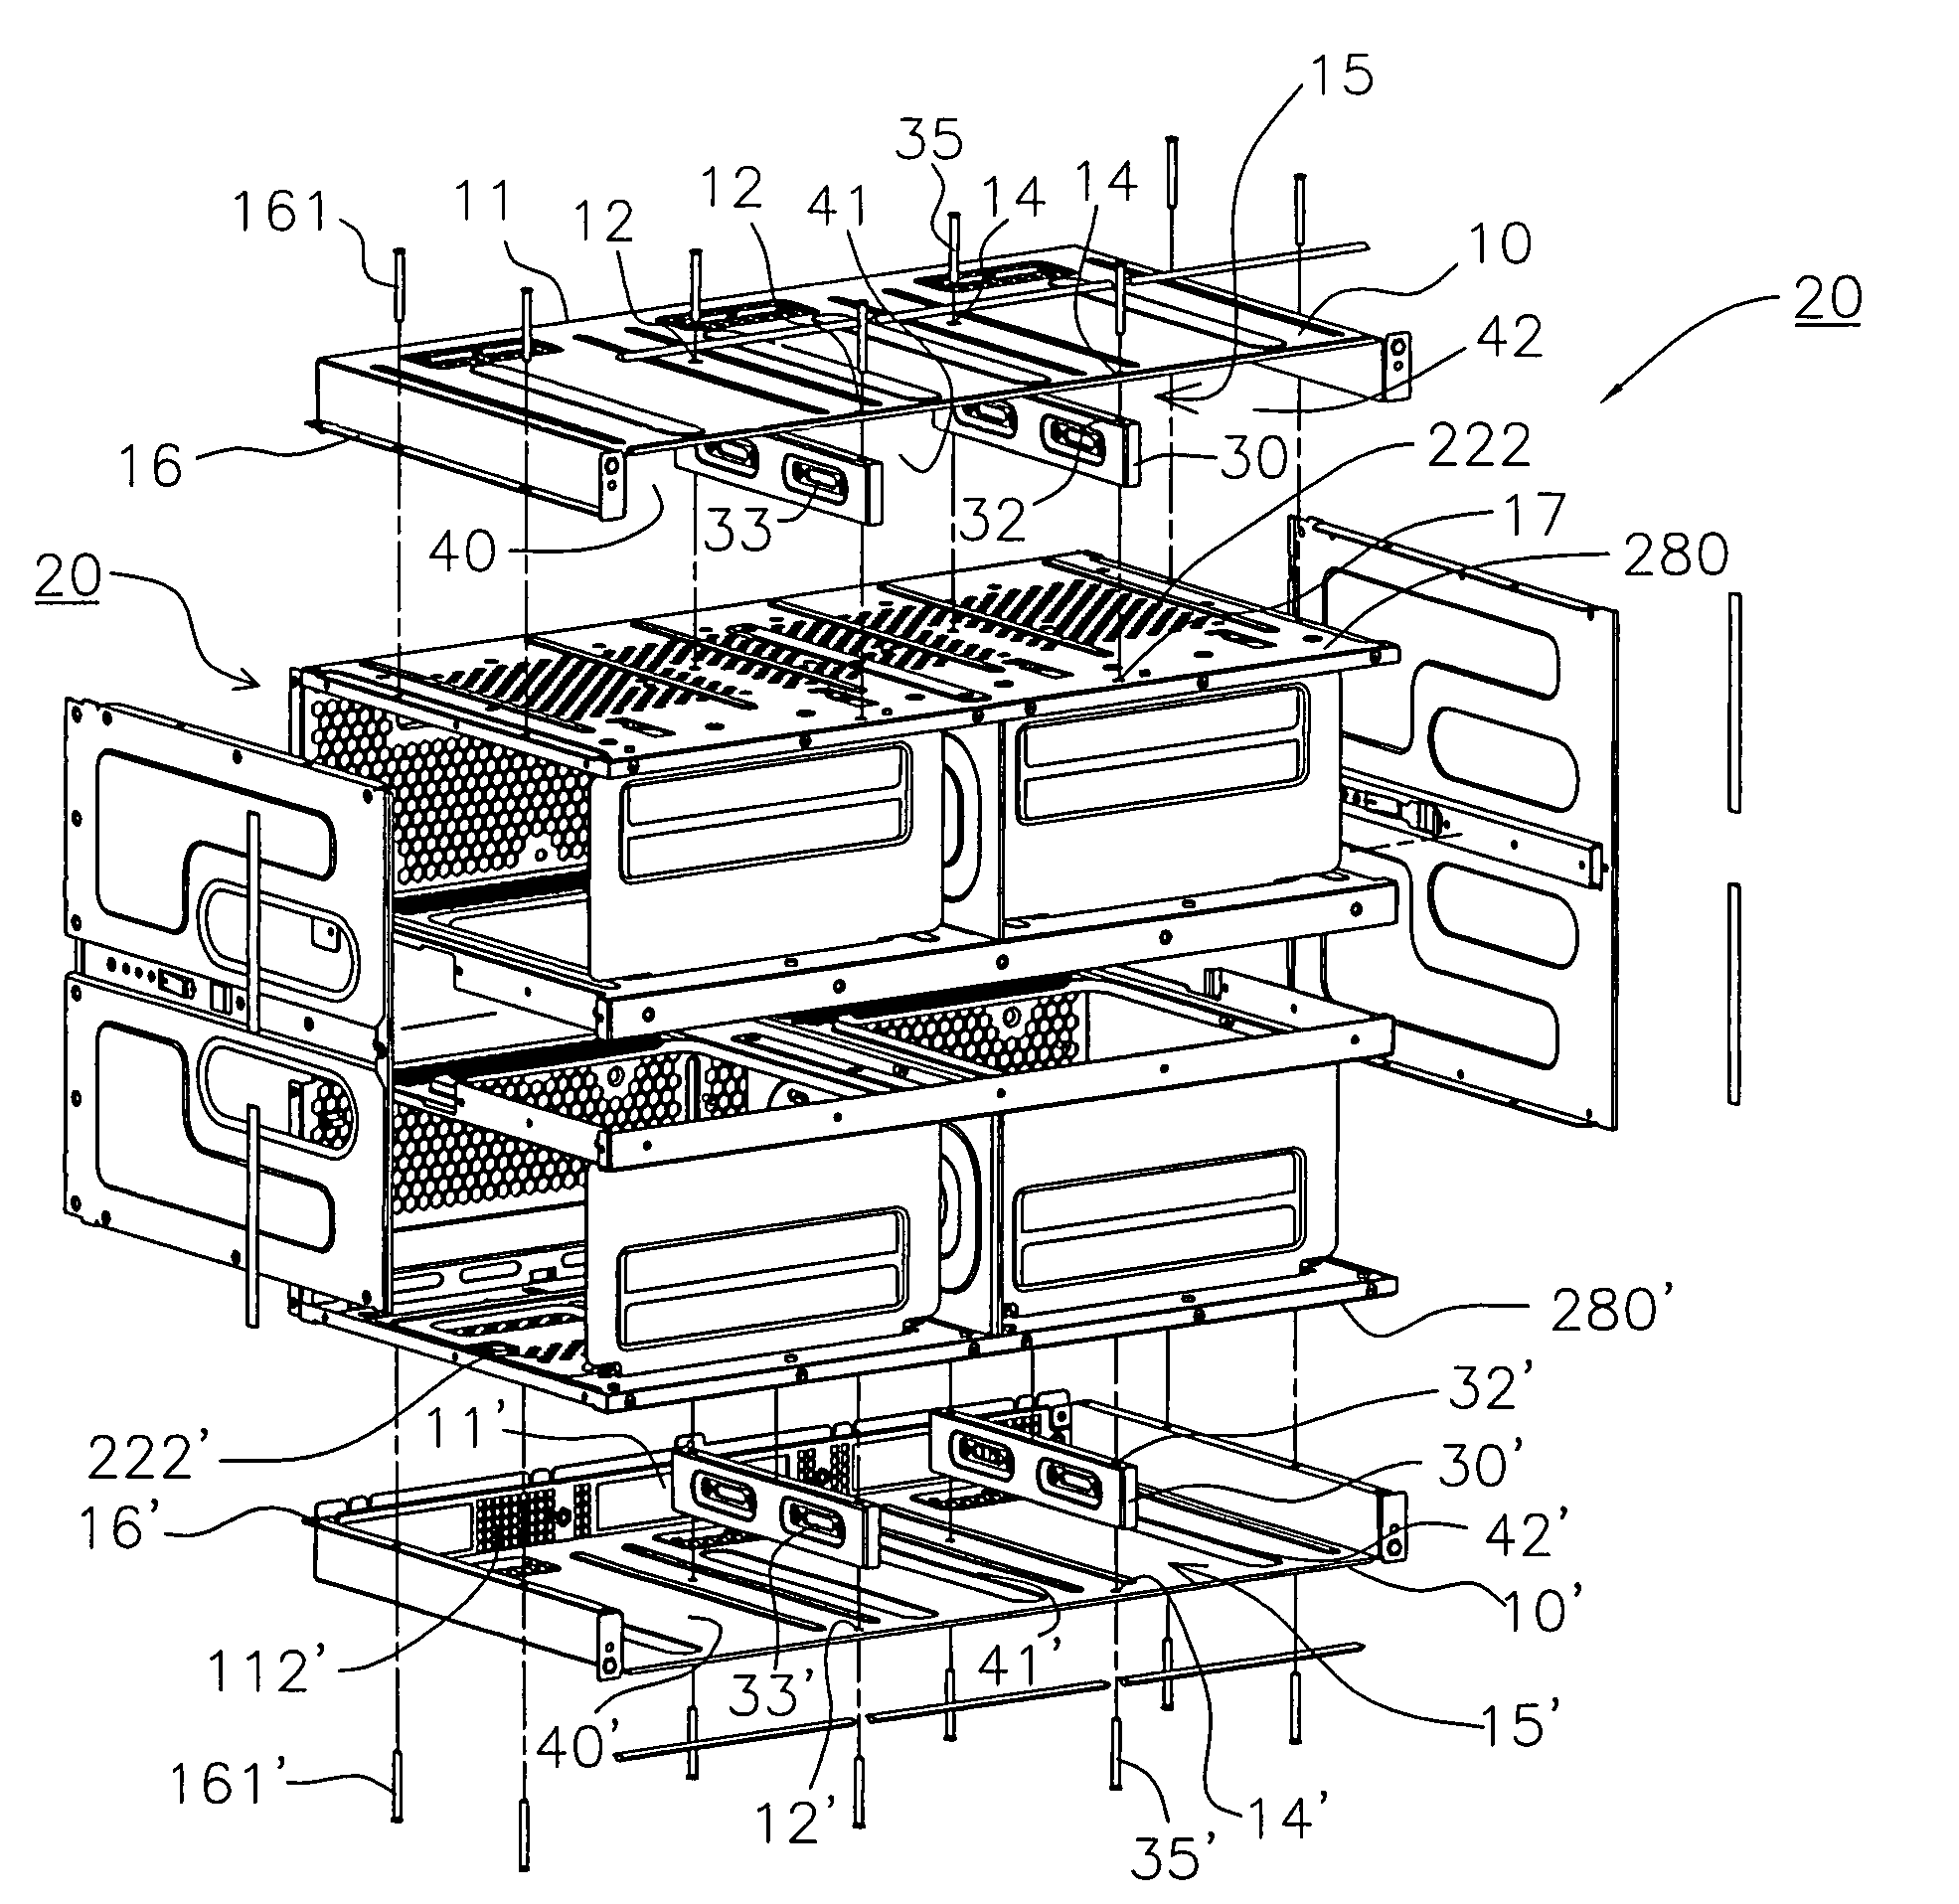 Partitioning device for holding slots of a host computer case